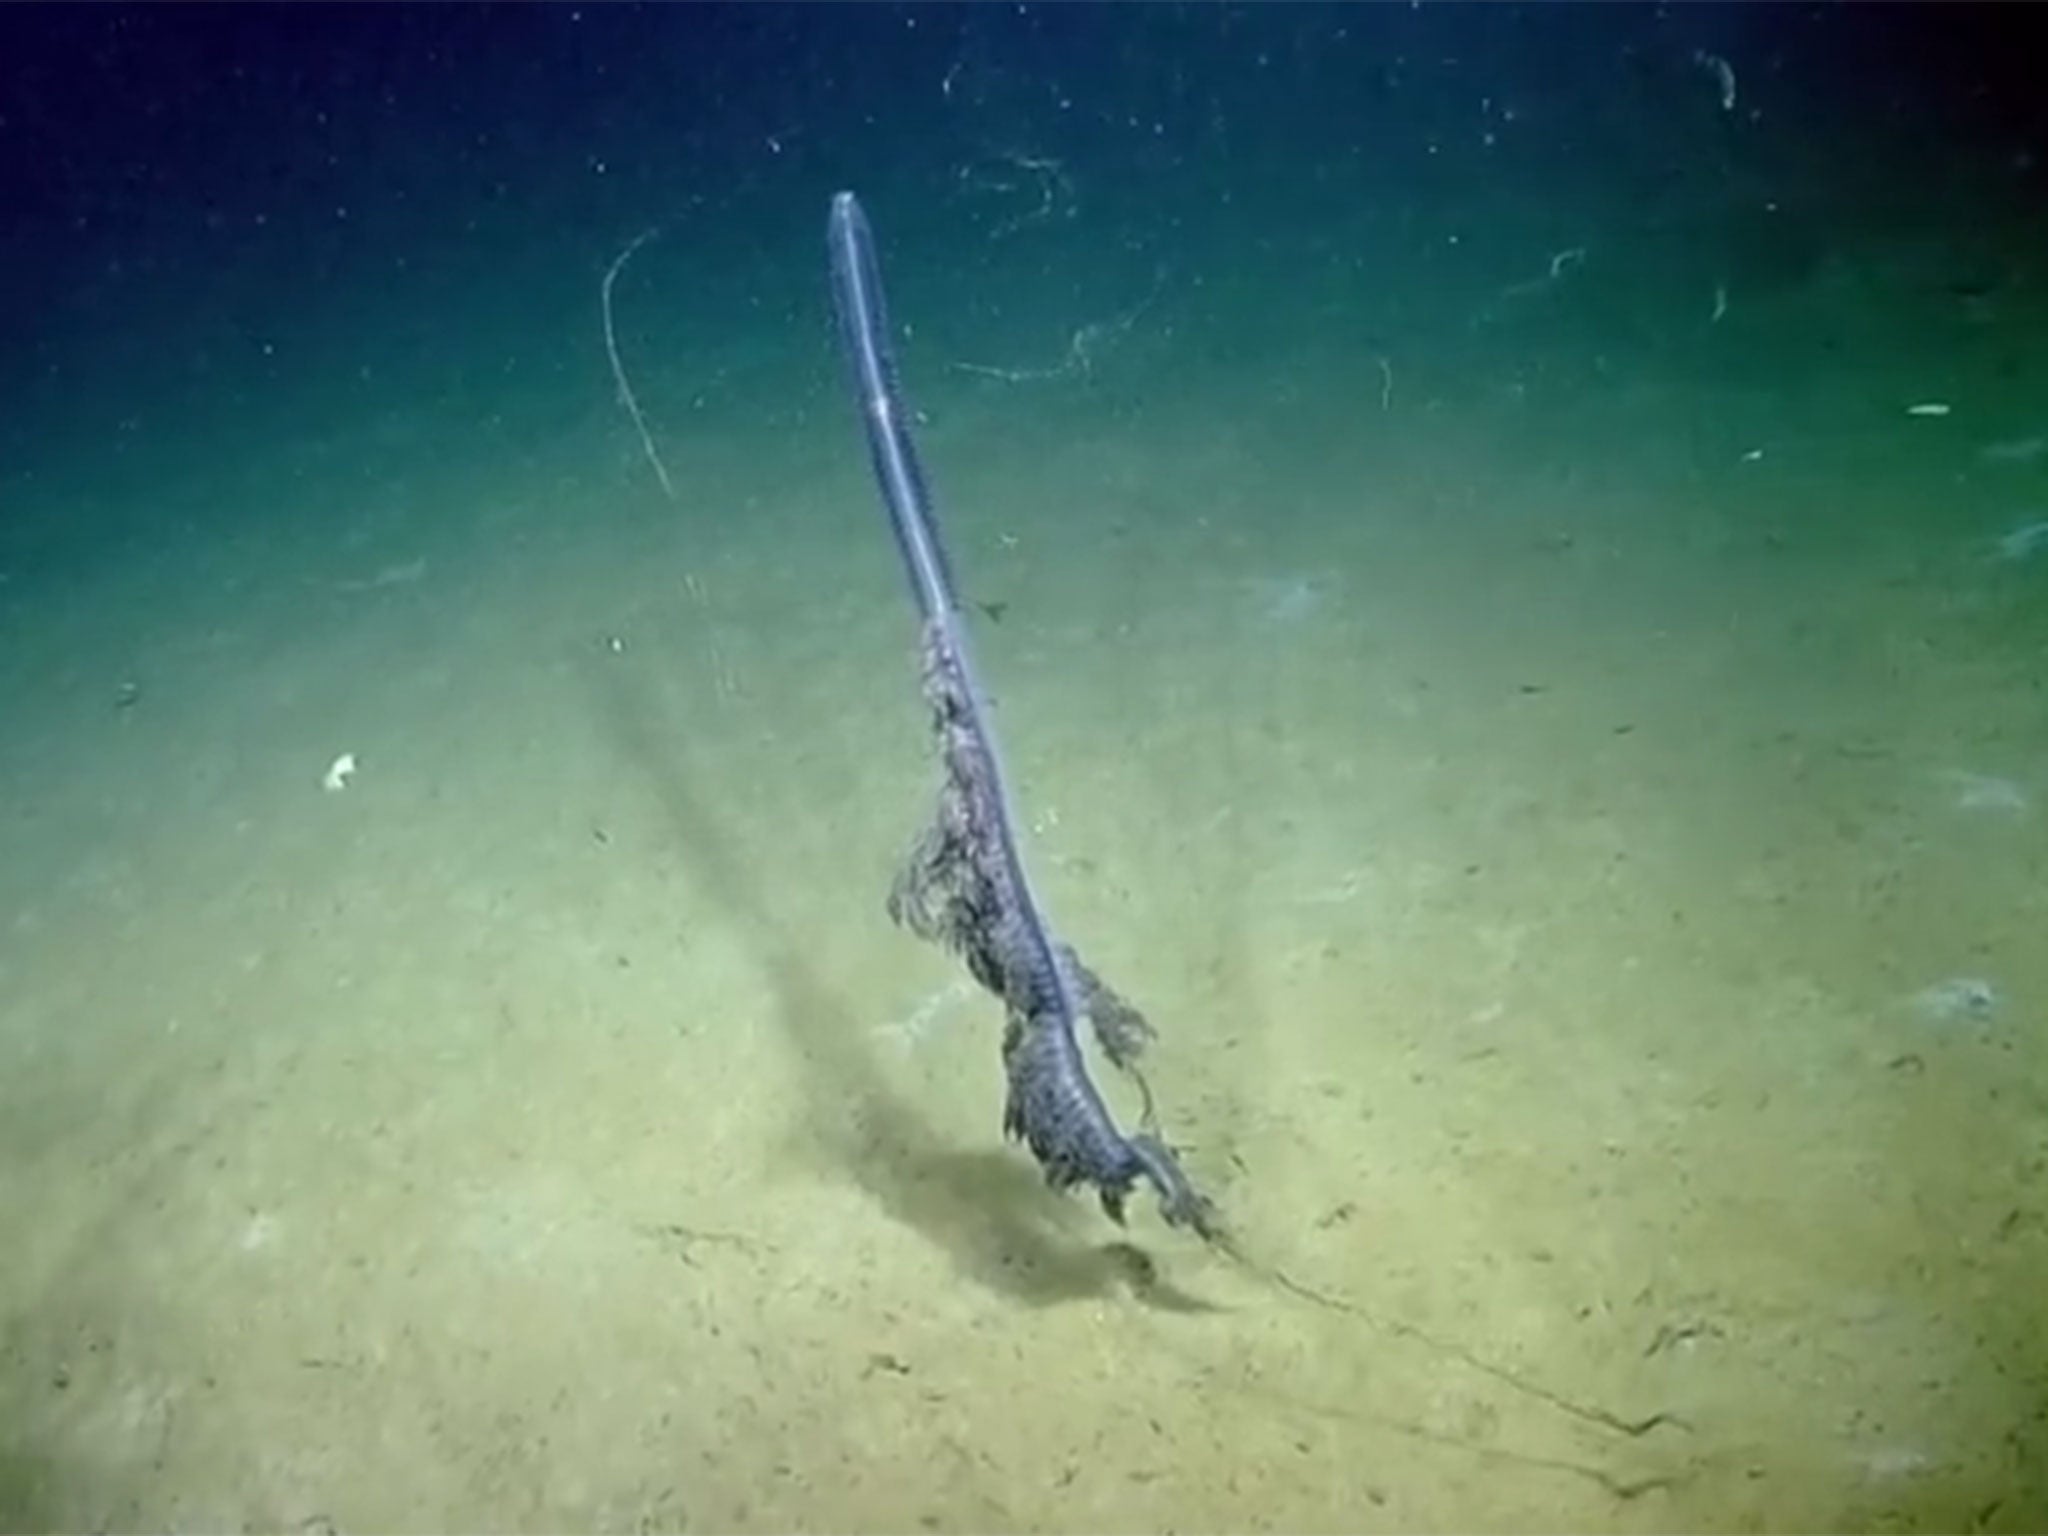 The rare siphonophore discovered during an expedition in the Gulf of Mexico